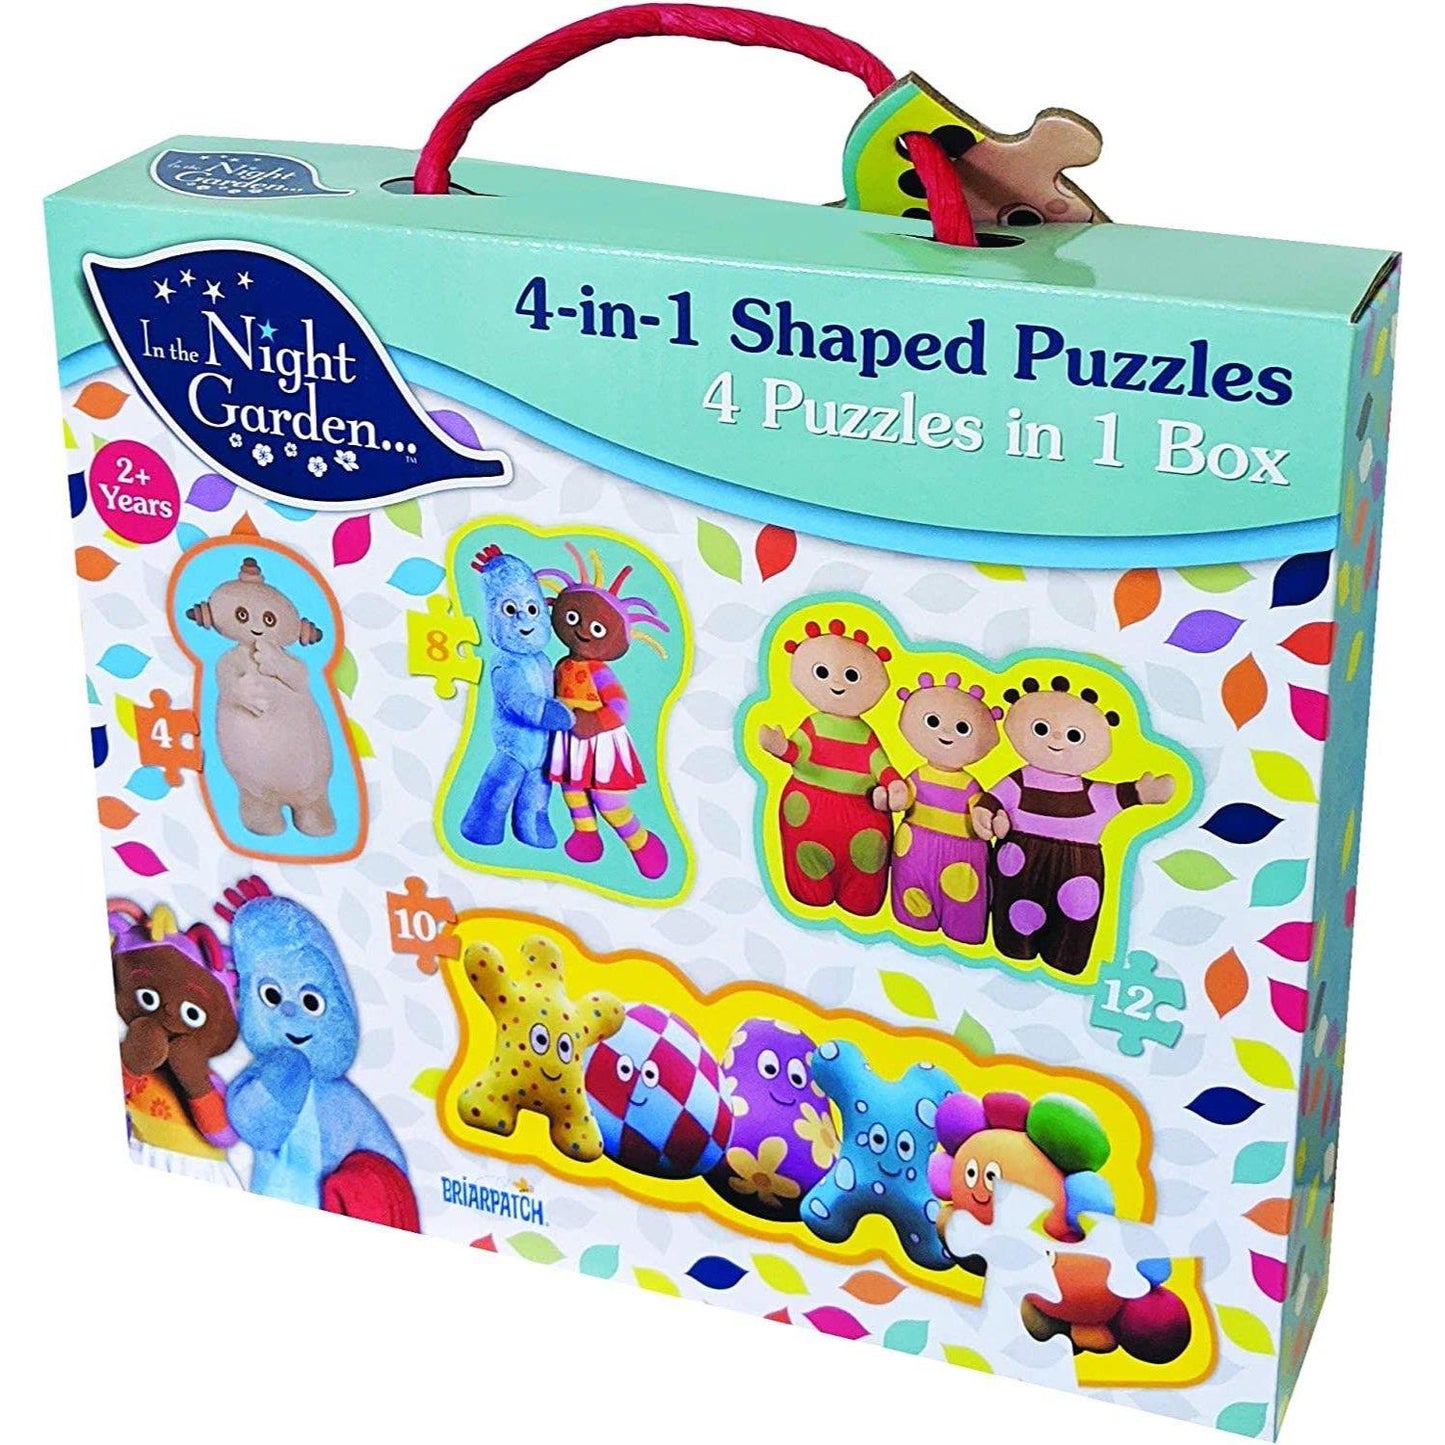 In the Night Garden 4in1 Puzzle Set 7775 by University Games - UKBuyZone